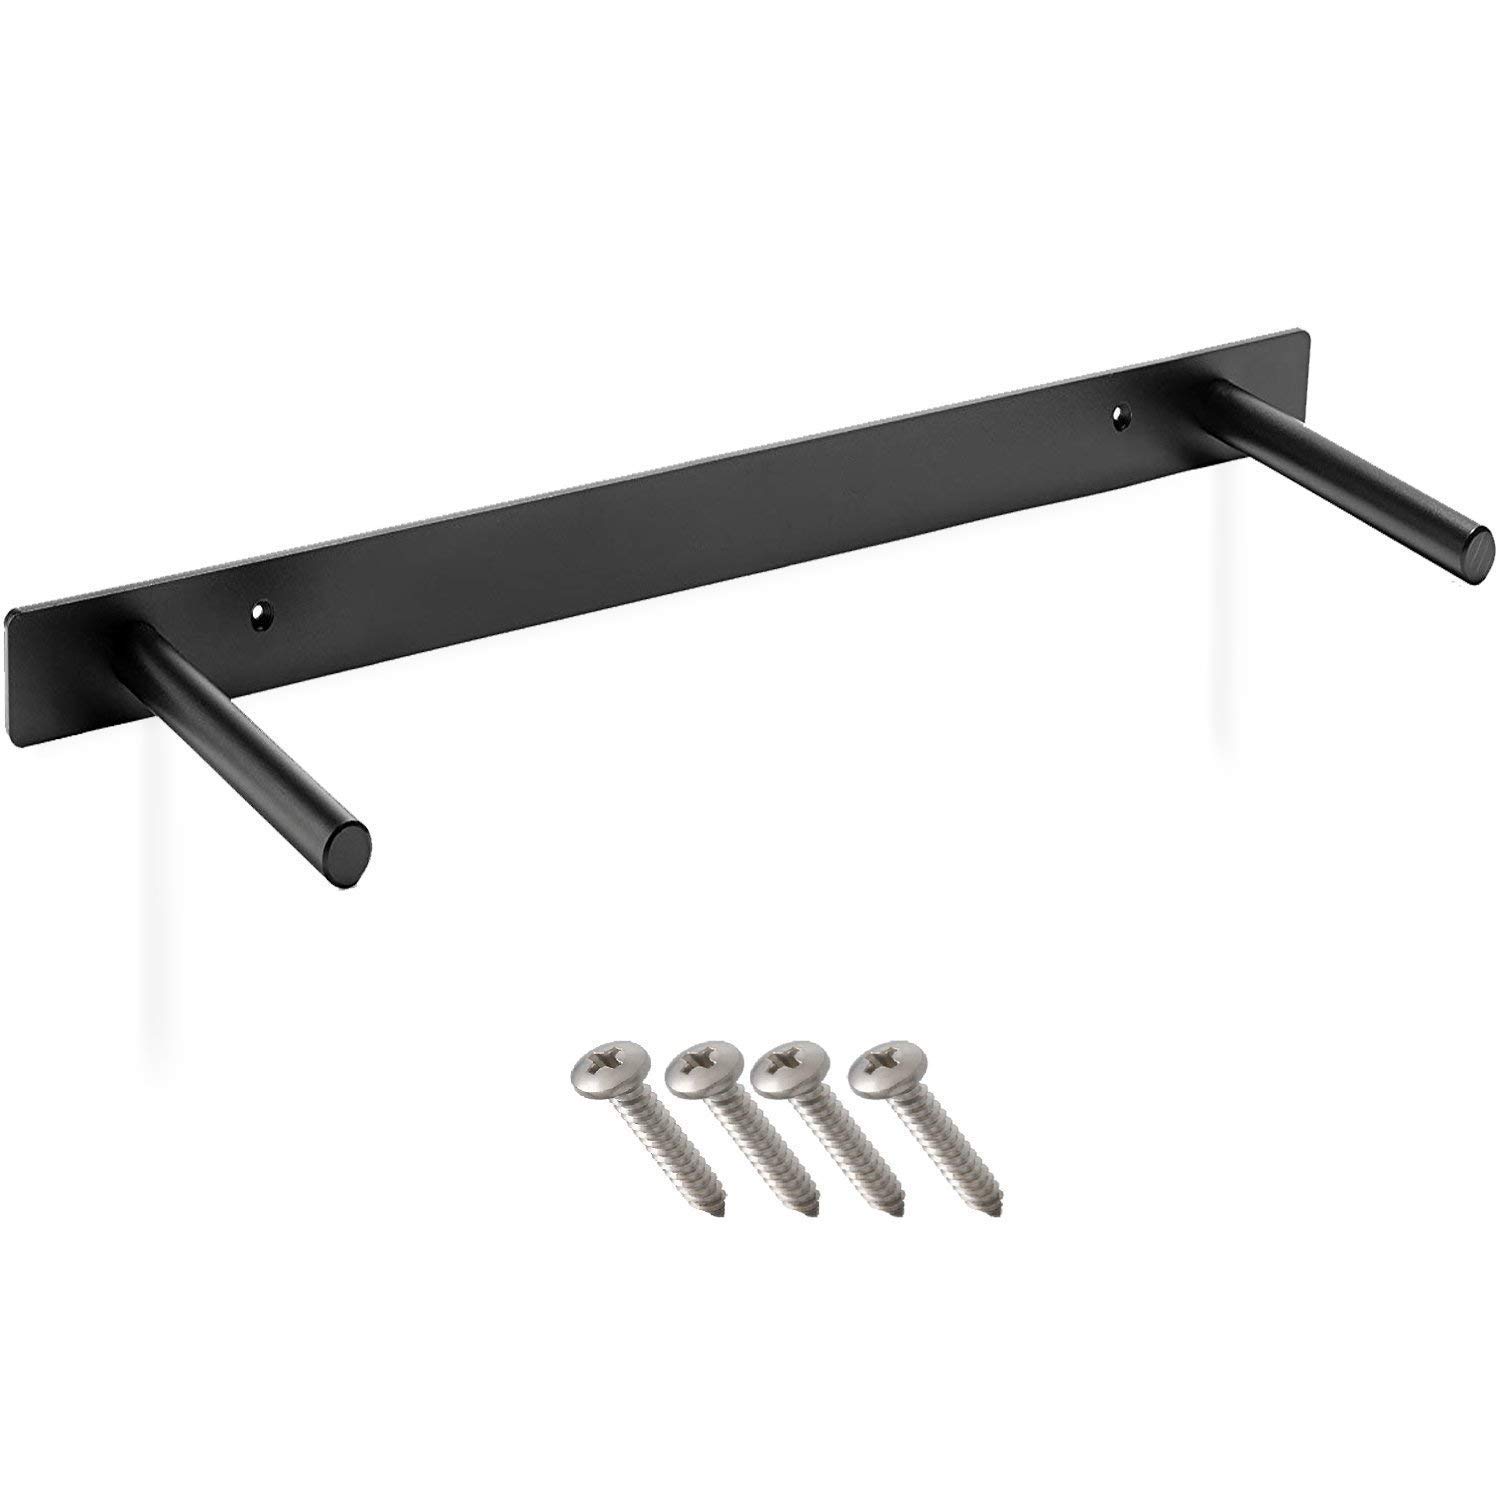 inch heavy duty floating shelf bracket rustproof deep brackets solid steel with black powder coating long rods fully concealable invisible hidden clothes tree hanger installing